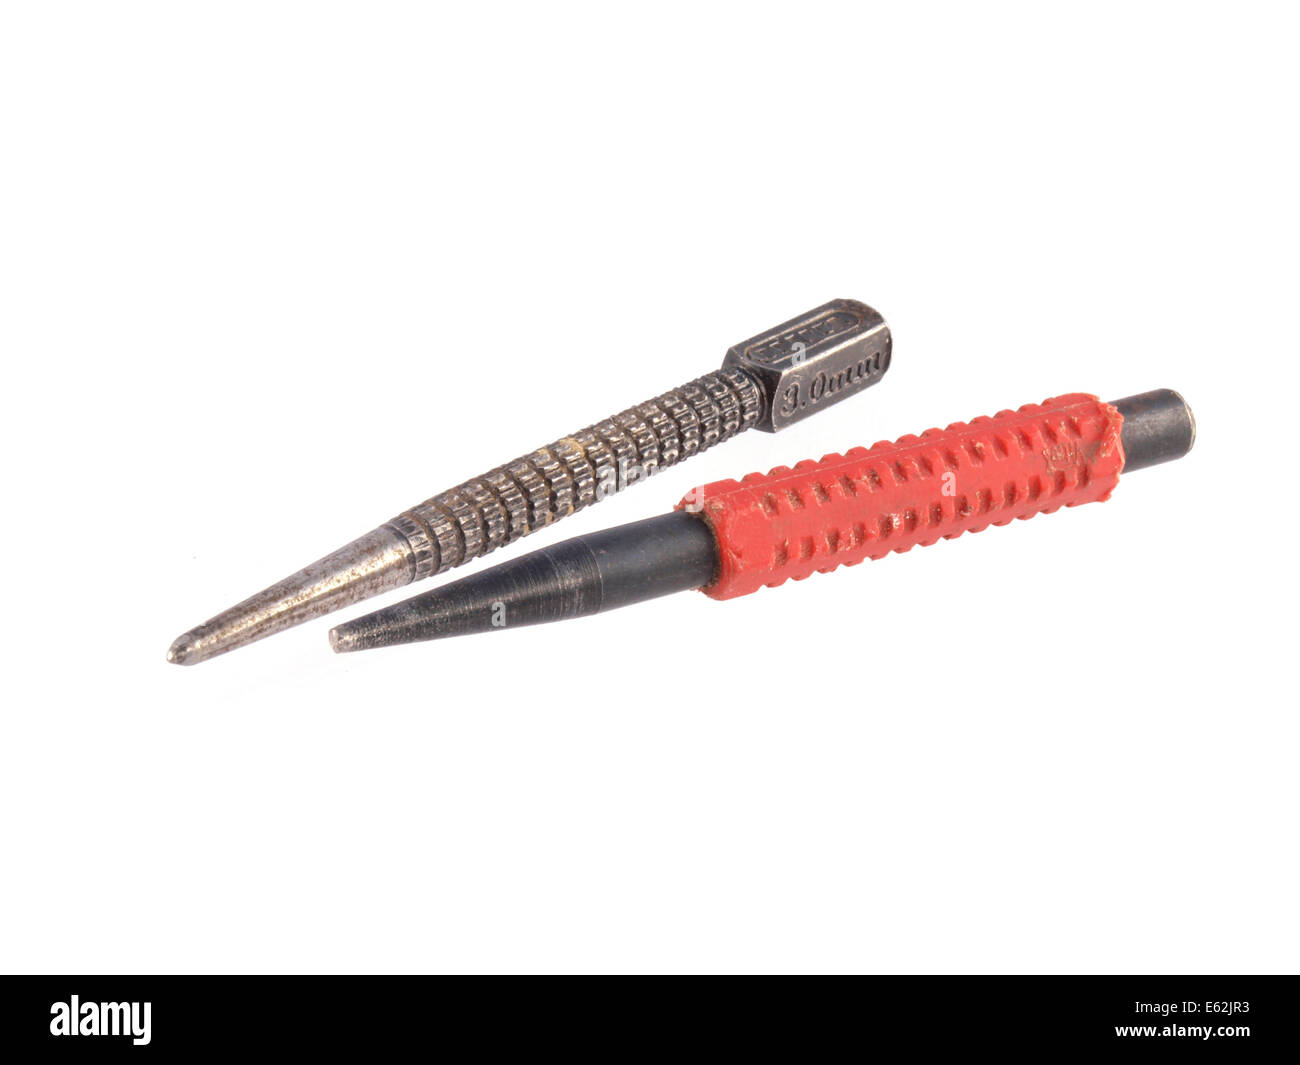 Close up photo of two nail punches on a white background. Stock Photo